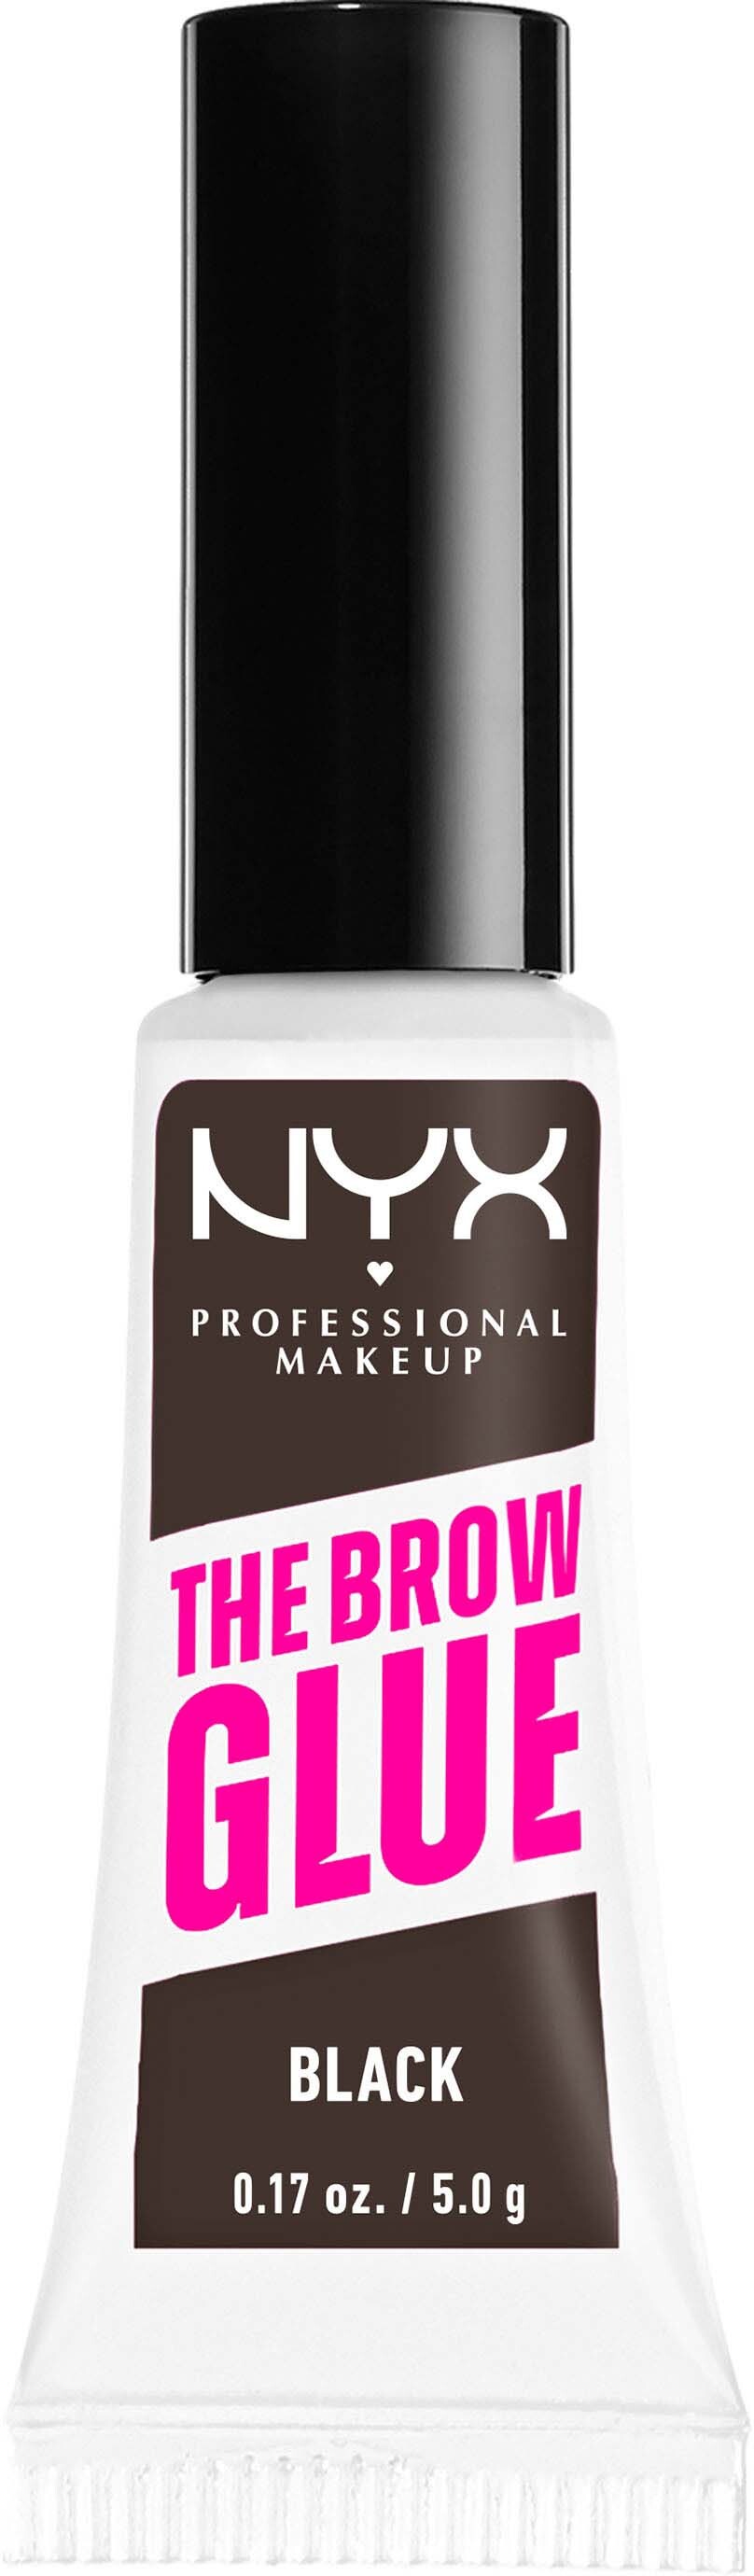 NYX PROFESSIONAL MAKEUP The Brow Glue Instant Brow Styler 05 Blac